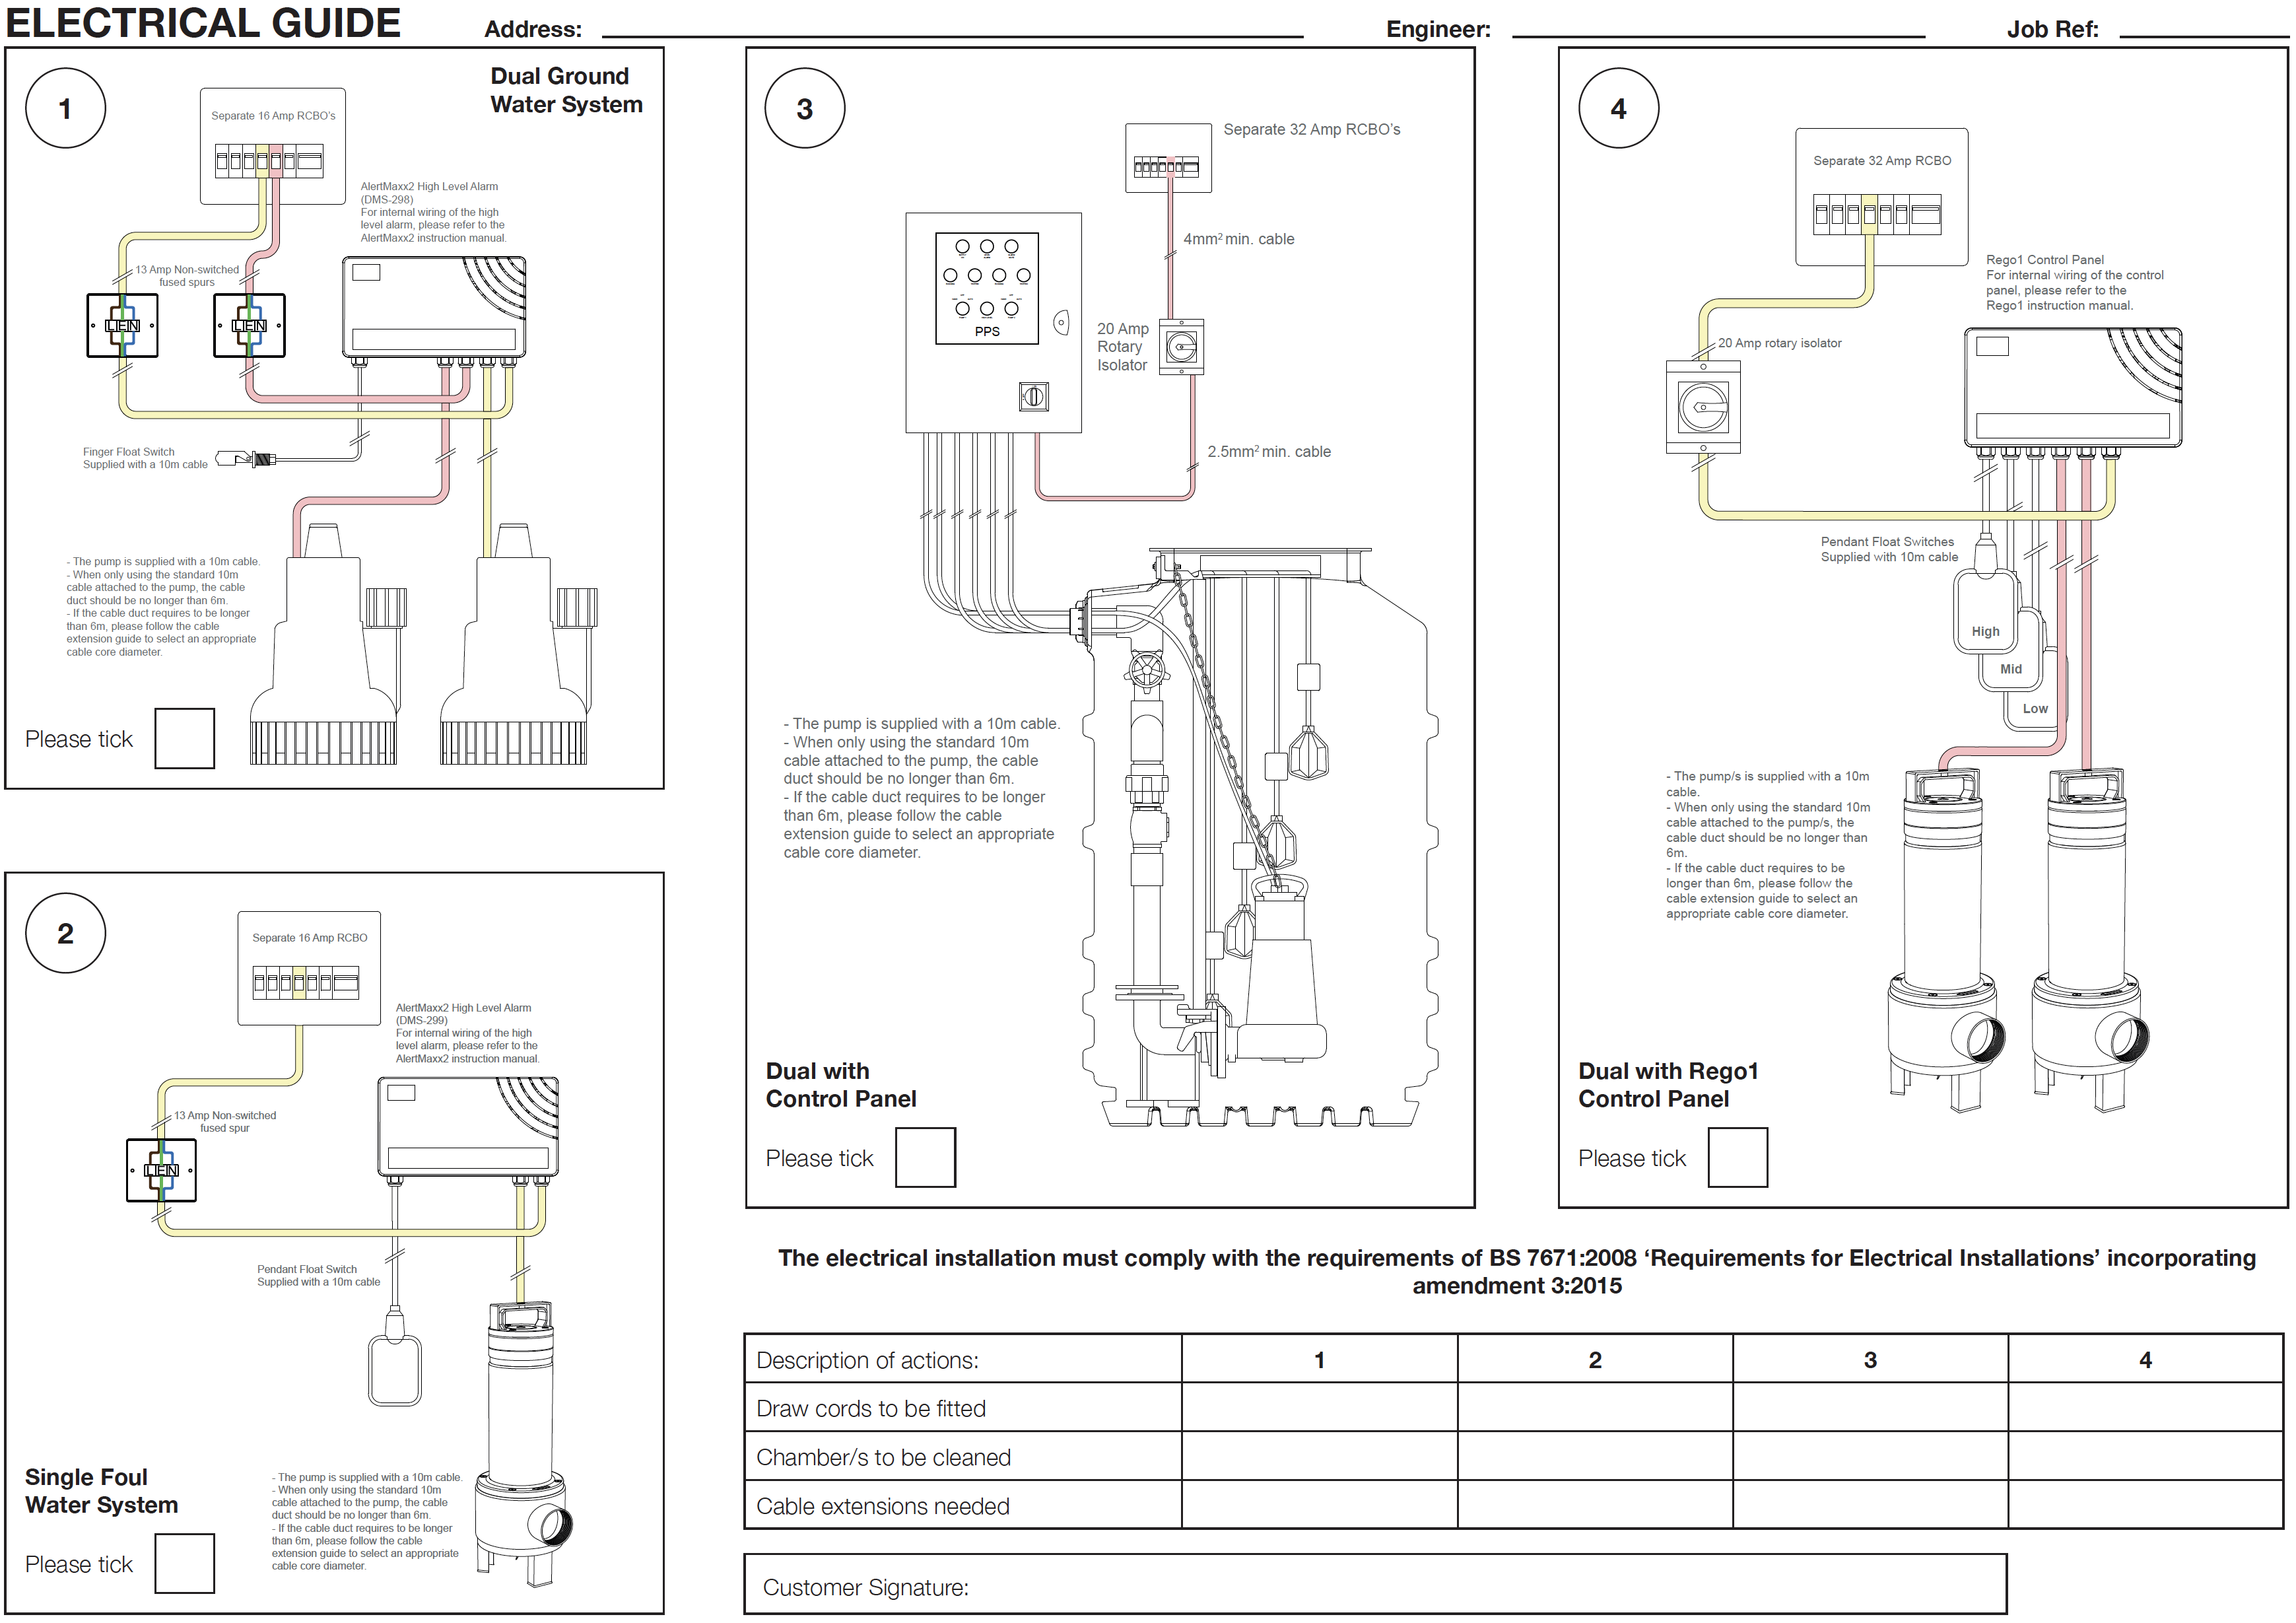 pps-wiring-diagram-guidance-sheet.png